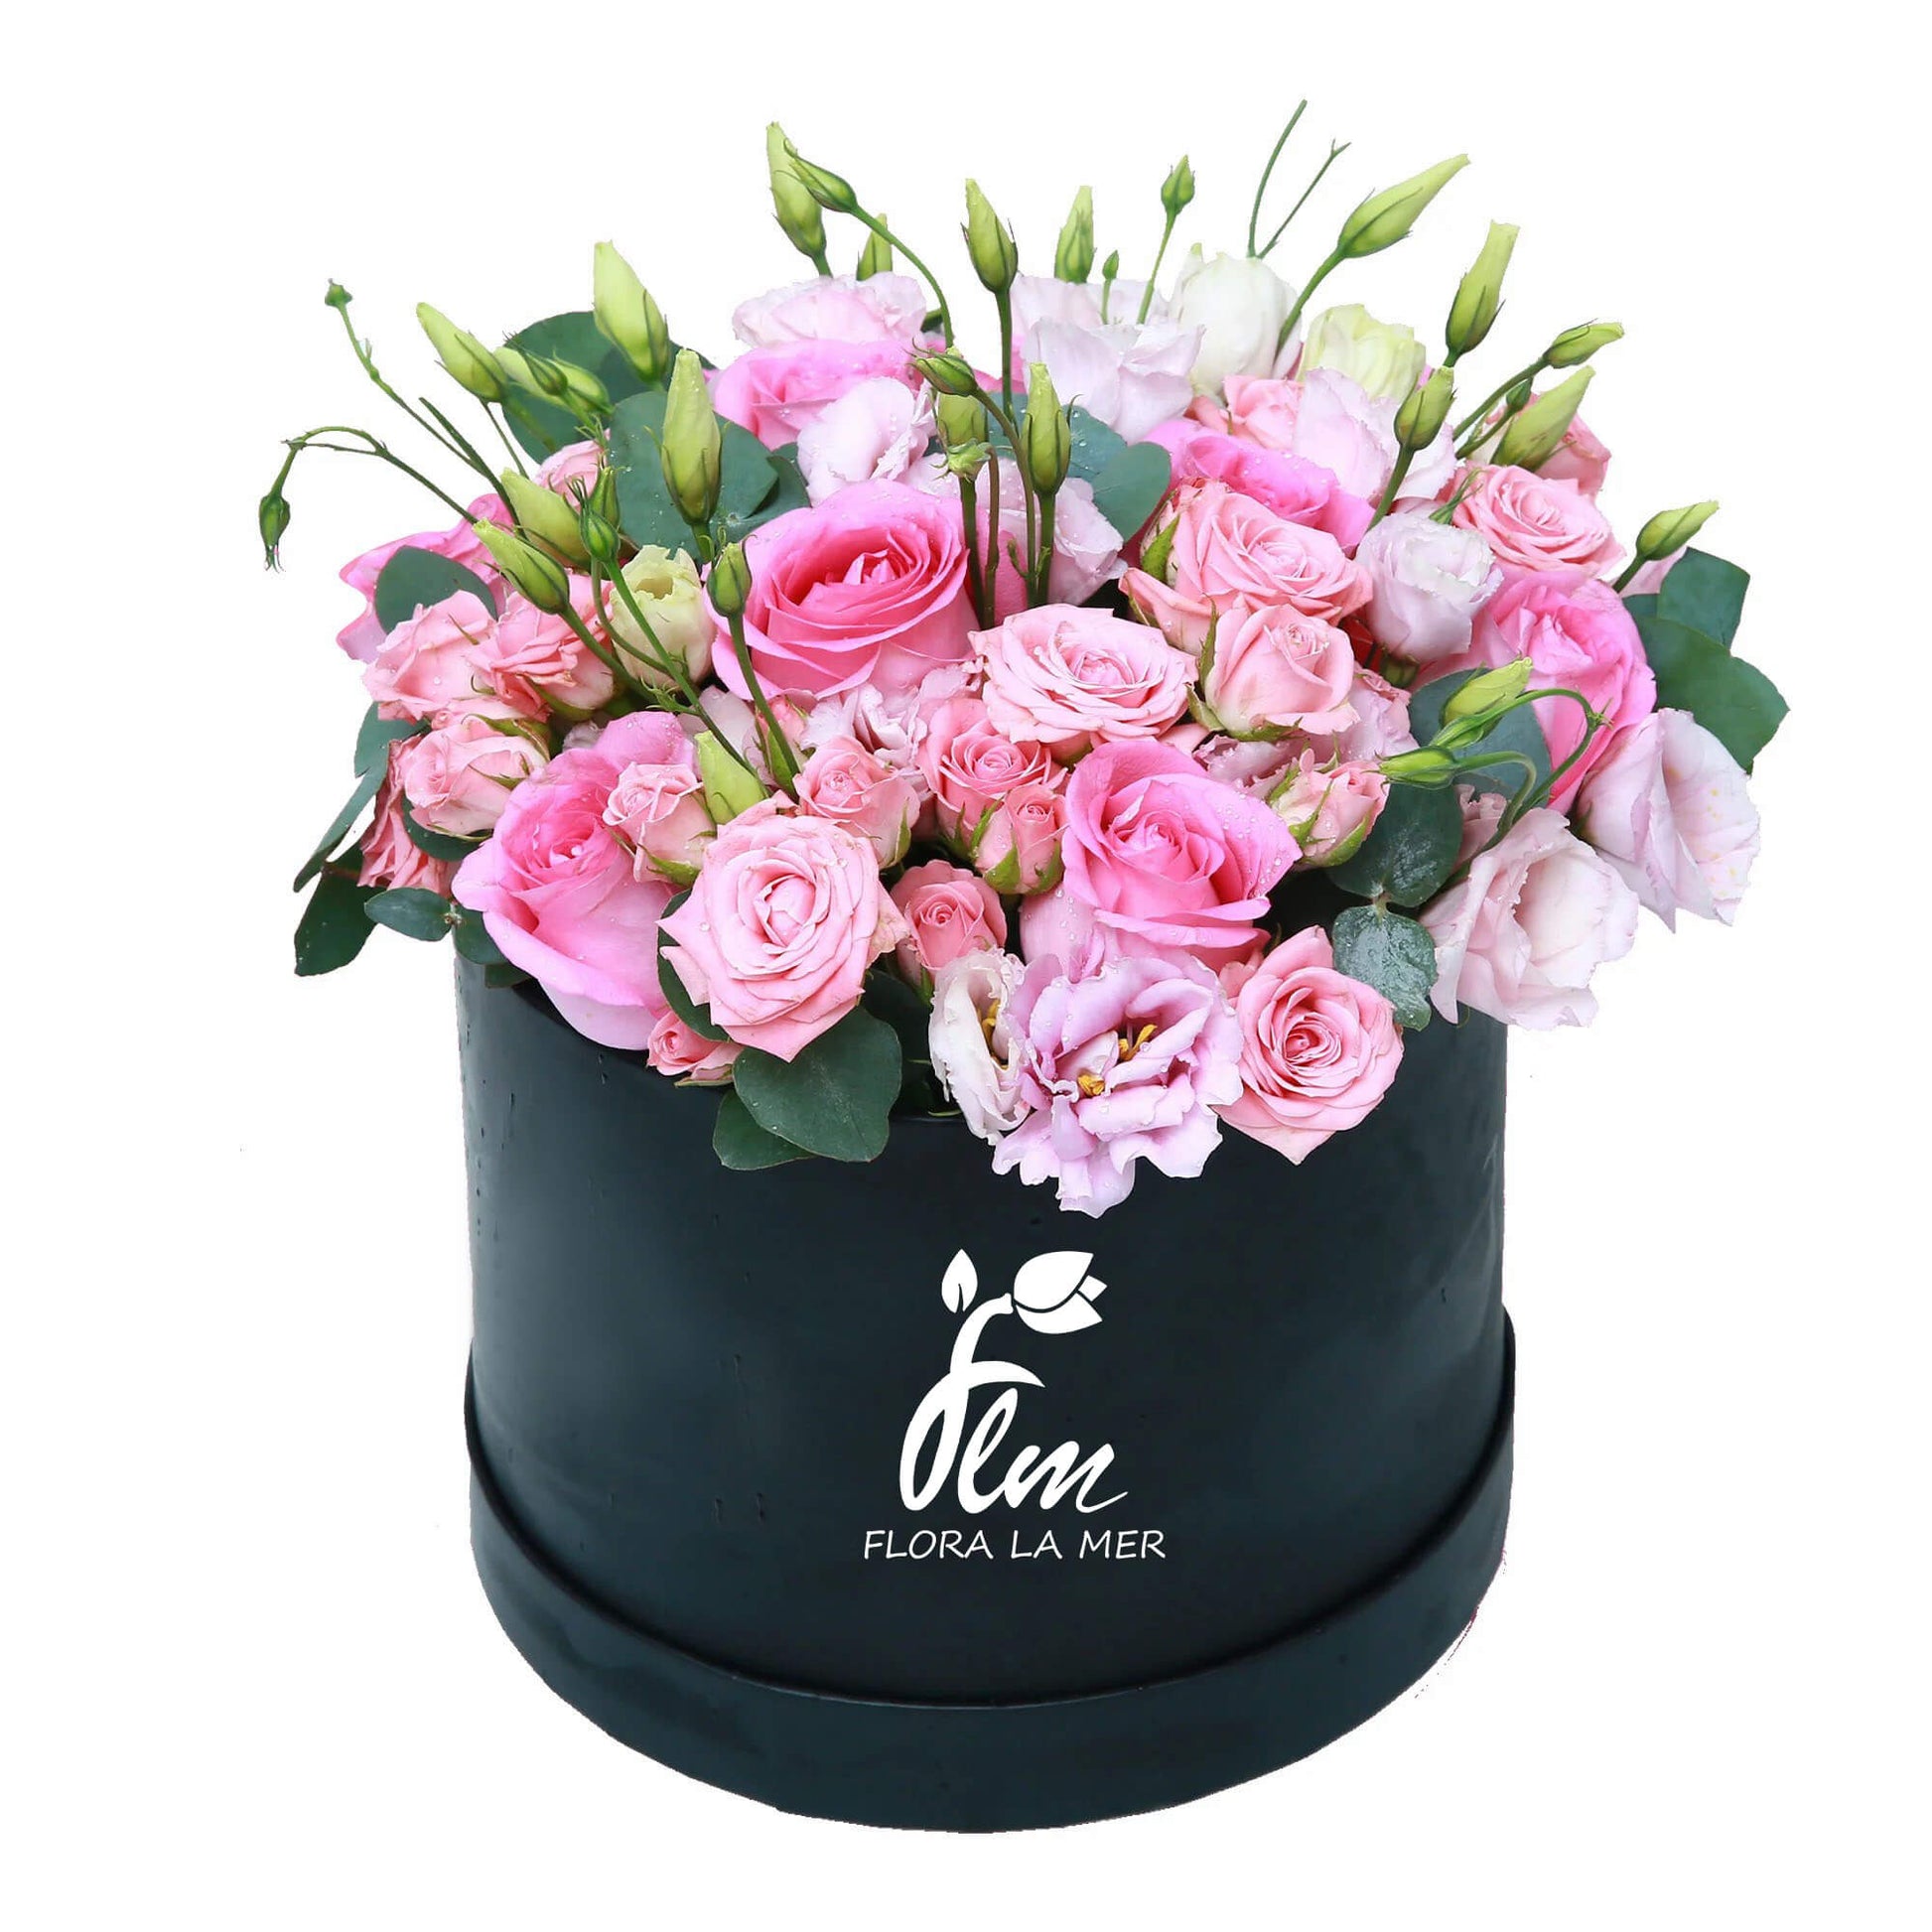 Experience a delightful array of nature's finest with our Mixed Flower Box. Overflowing with a harmonious blend of blooms in various hues and textures, this box is a versatile gift for any celebration or to add a touch of charm to your own space. Elevate your surroundings with the beauty and freshness of these hand-selected flowers